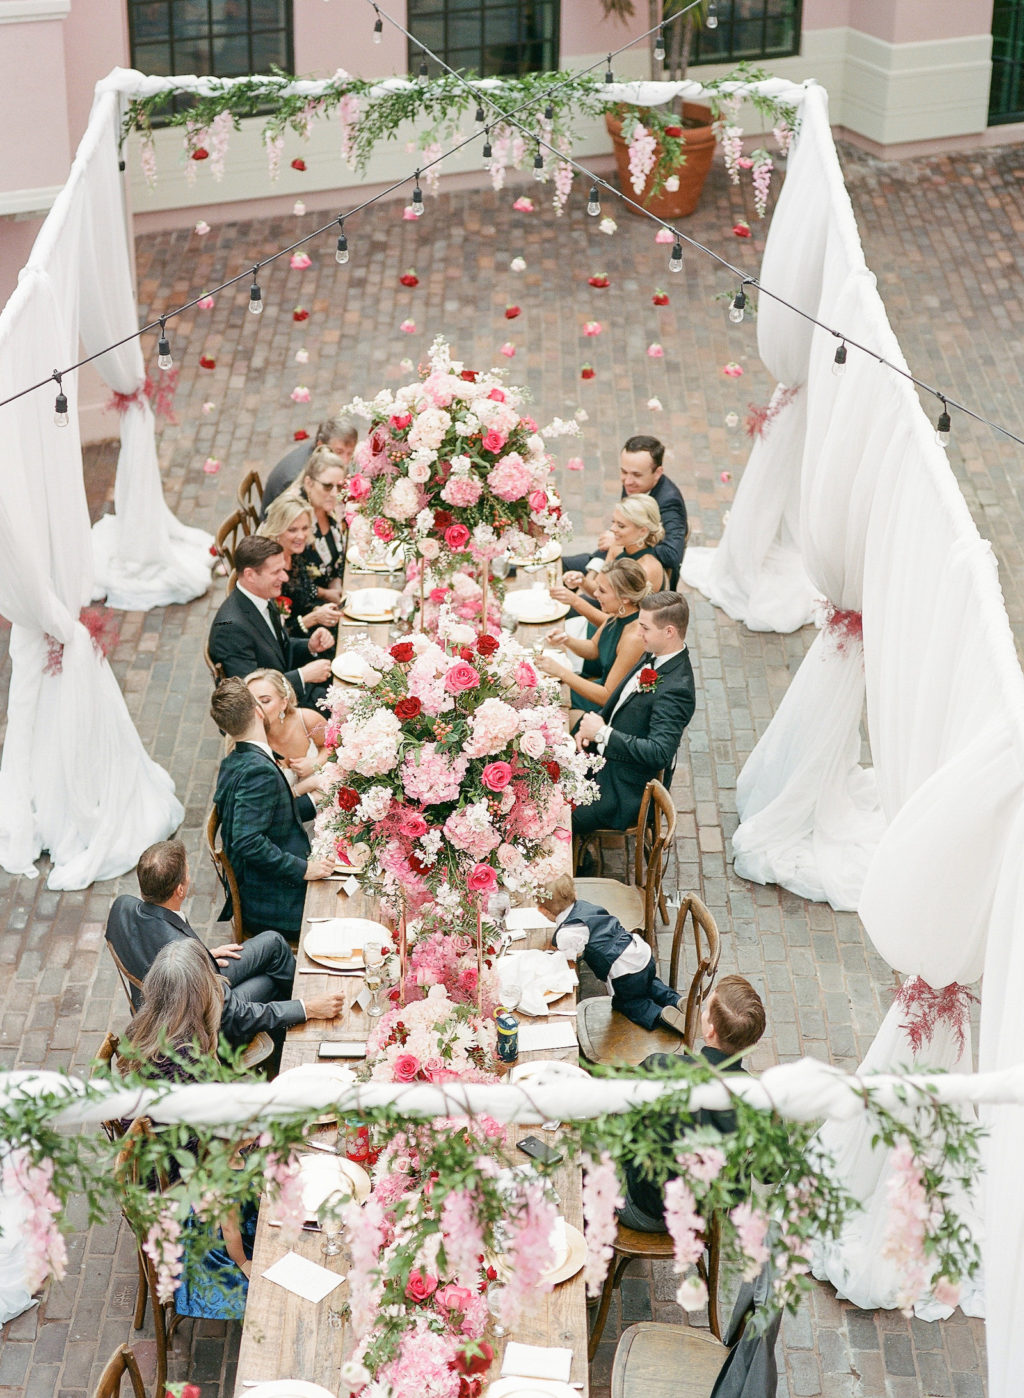 Wedding Guests Sitting At Elegant Garden Themed Wedding Reception, Long Wooden Feasting Table in Outdoor Hotel Courtyard, White Drapery with Hanging Flowers and String Lights, Lush Pink, Red Roses and White Flower Centerpieces and Table Runner